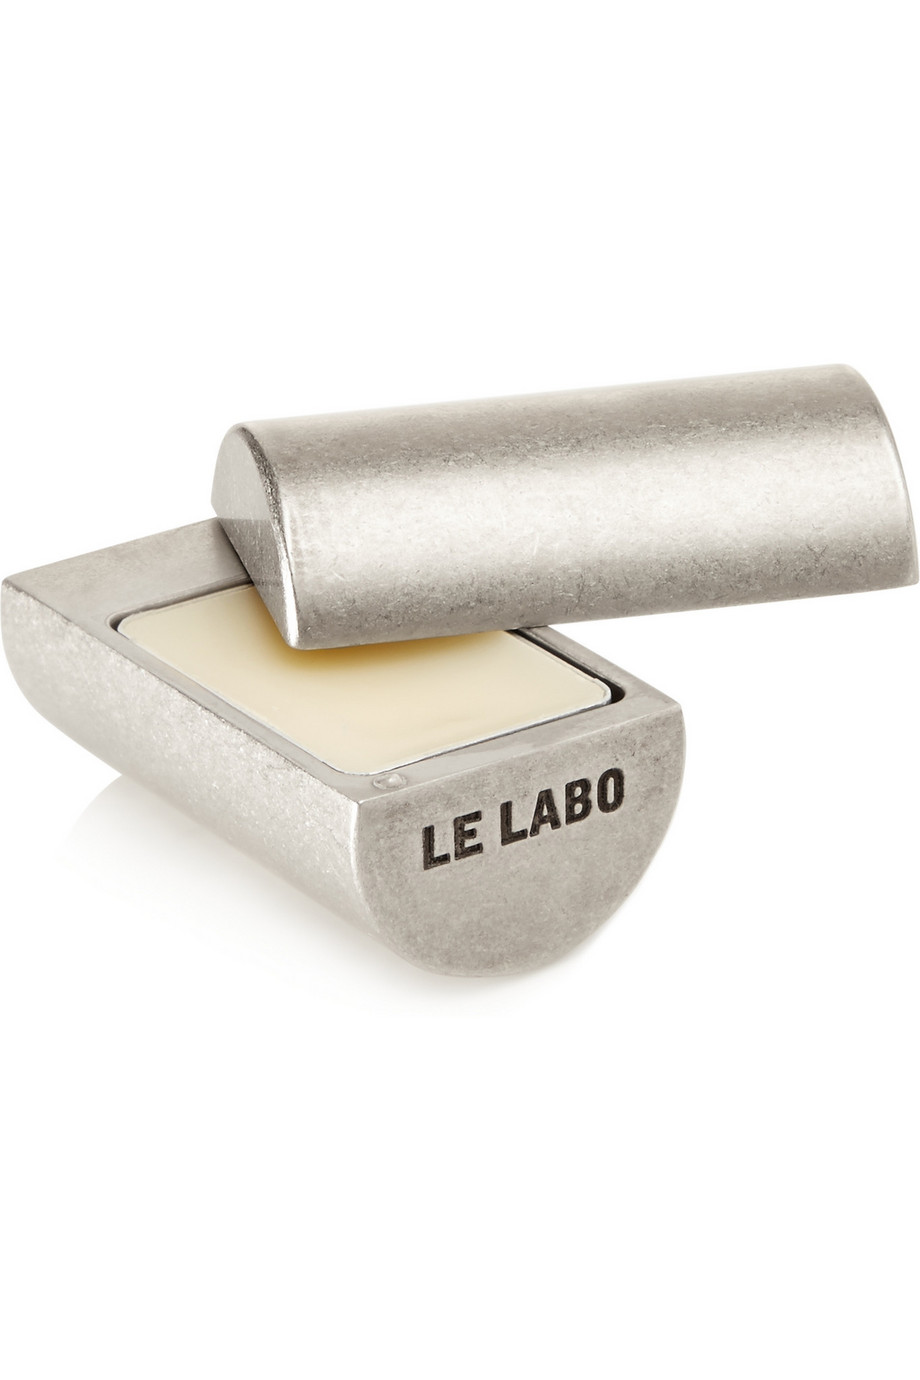 Le Labo Lys 41 Solid Perfume - Lily & White Flowers